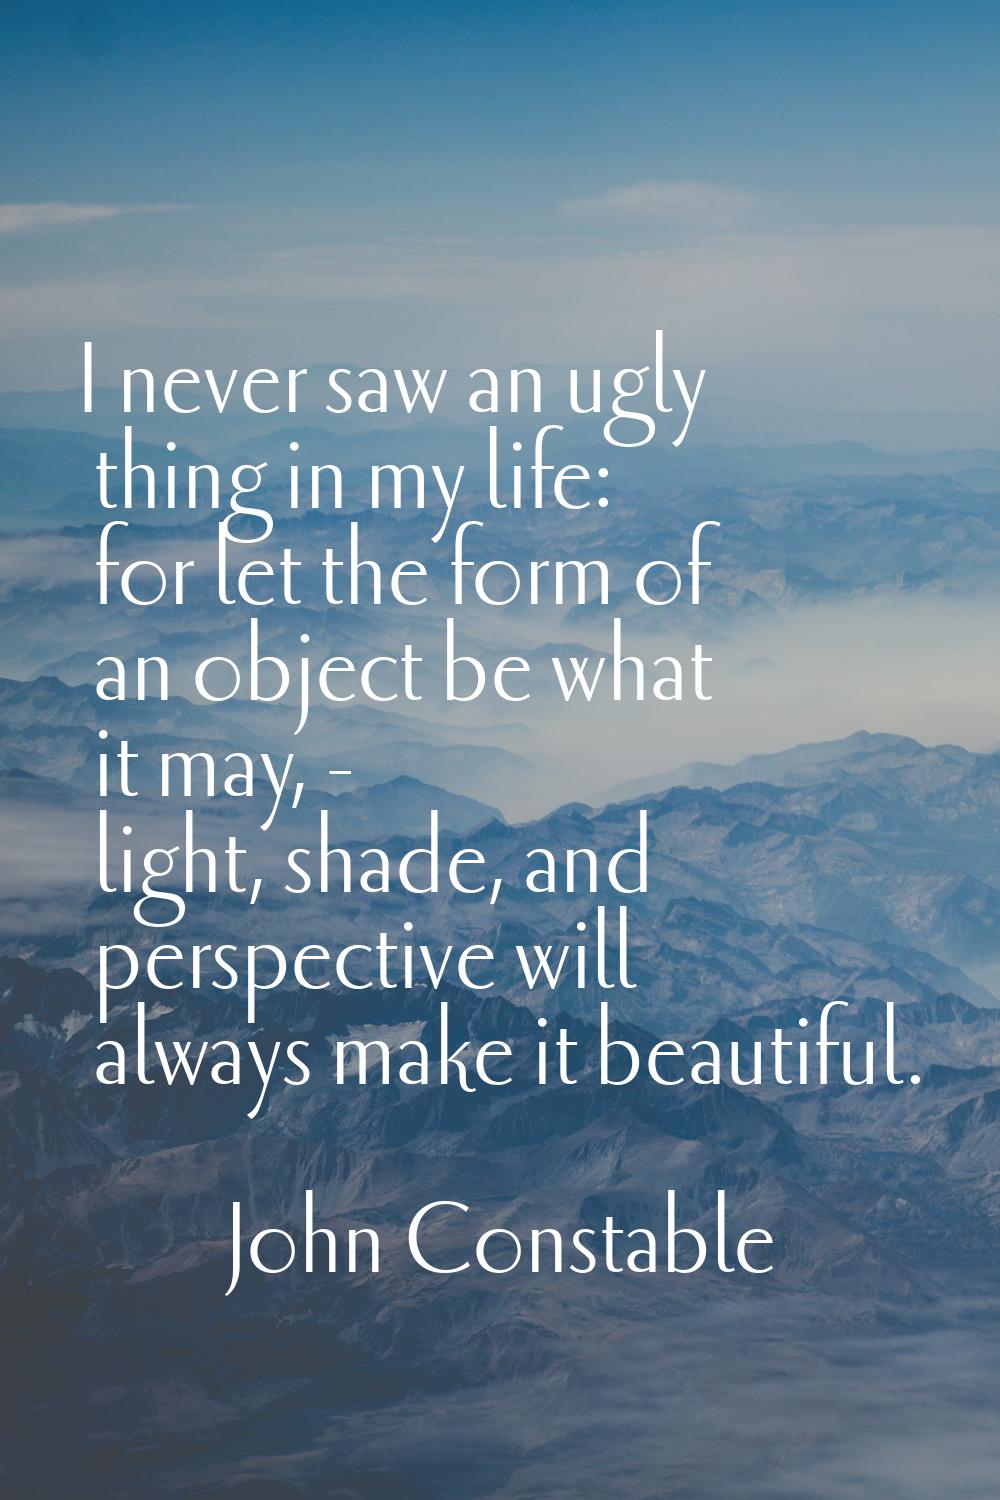 I never saw an ugly thing in my life: for let the form of an object be what it may, - light, shade,